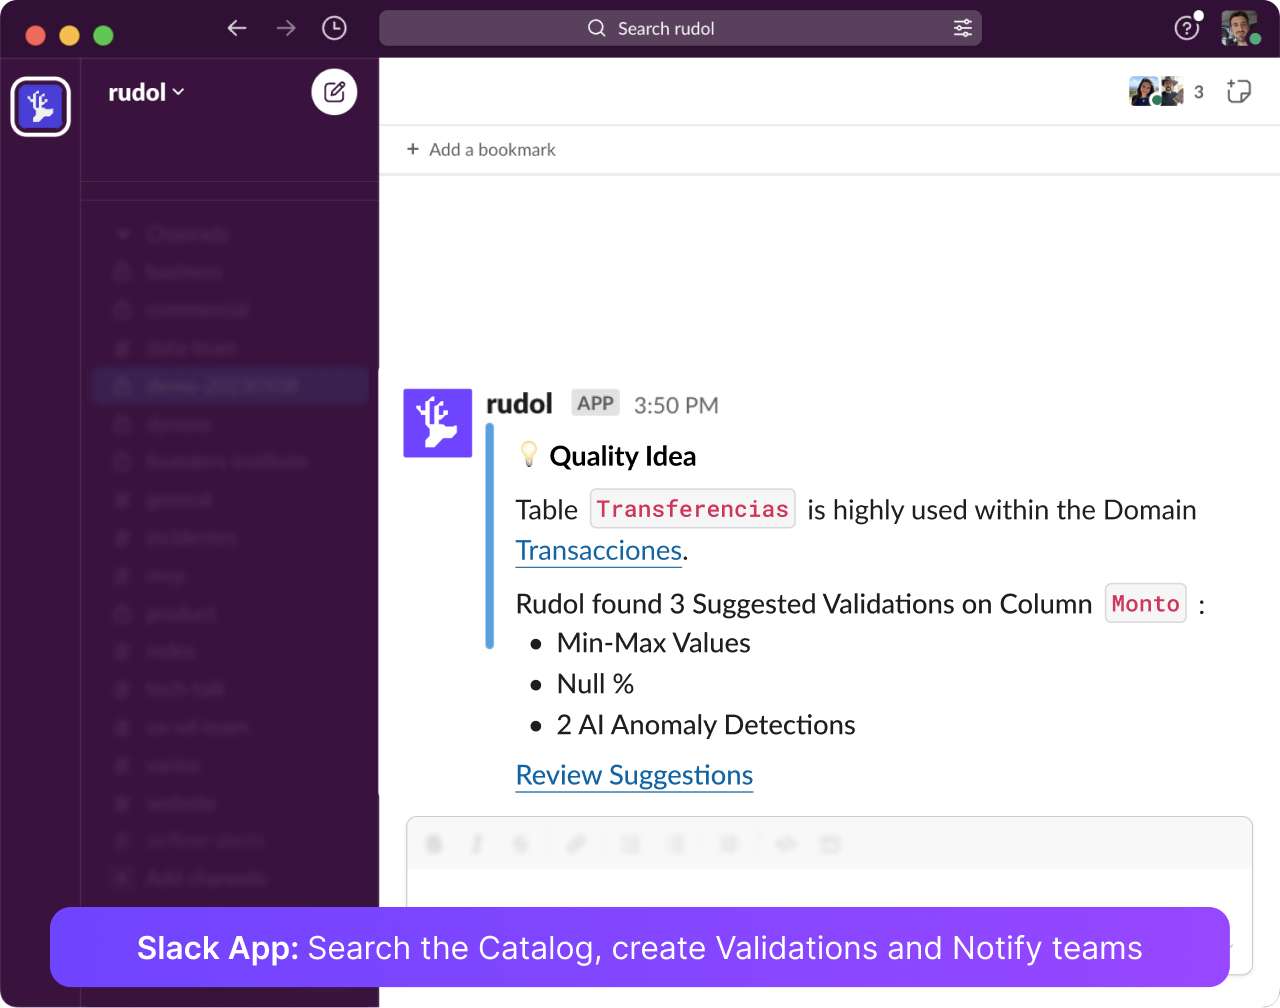 Slack App: Search the Catalog, create Validations and Notify teams 